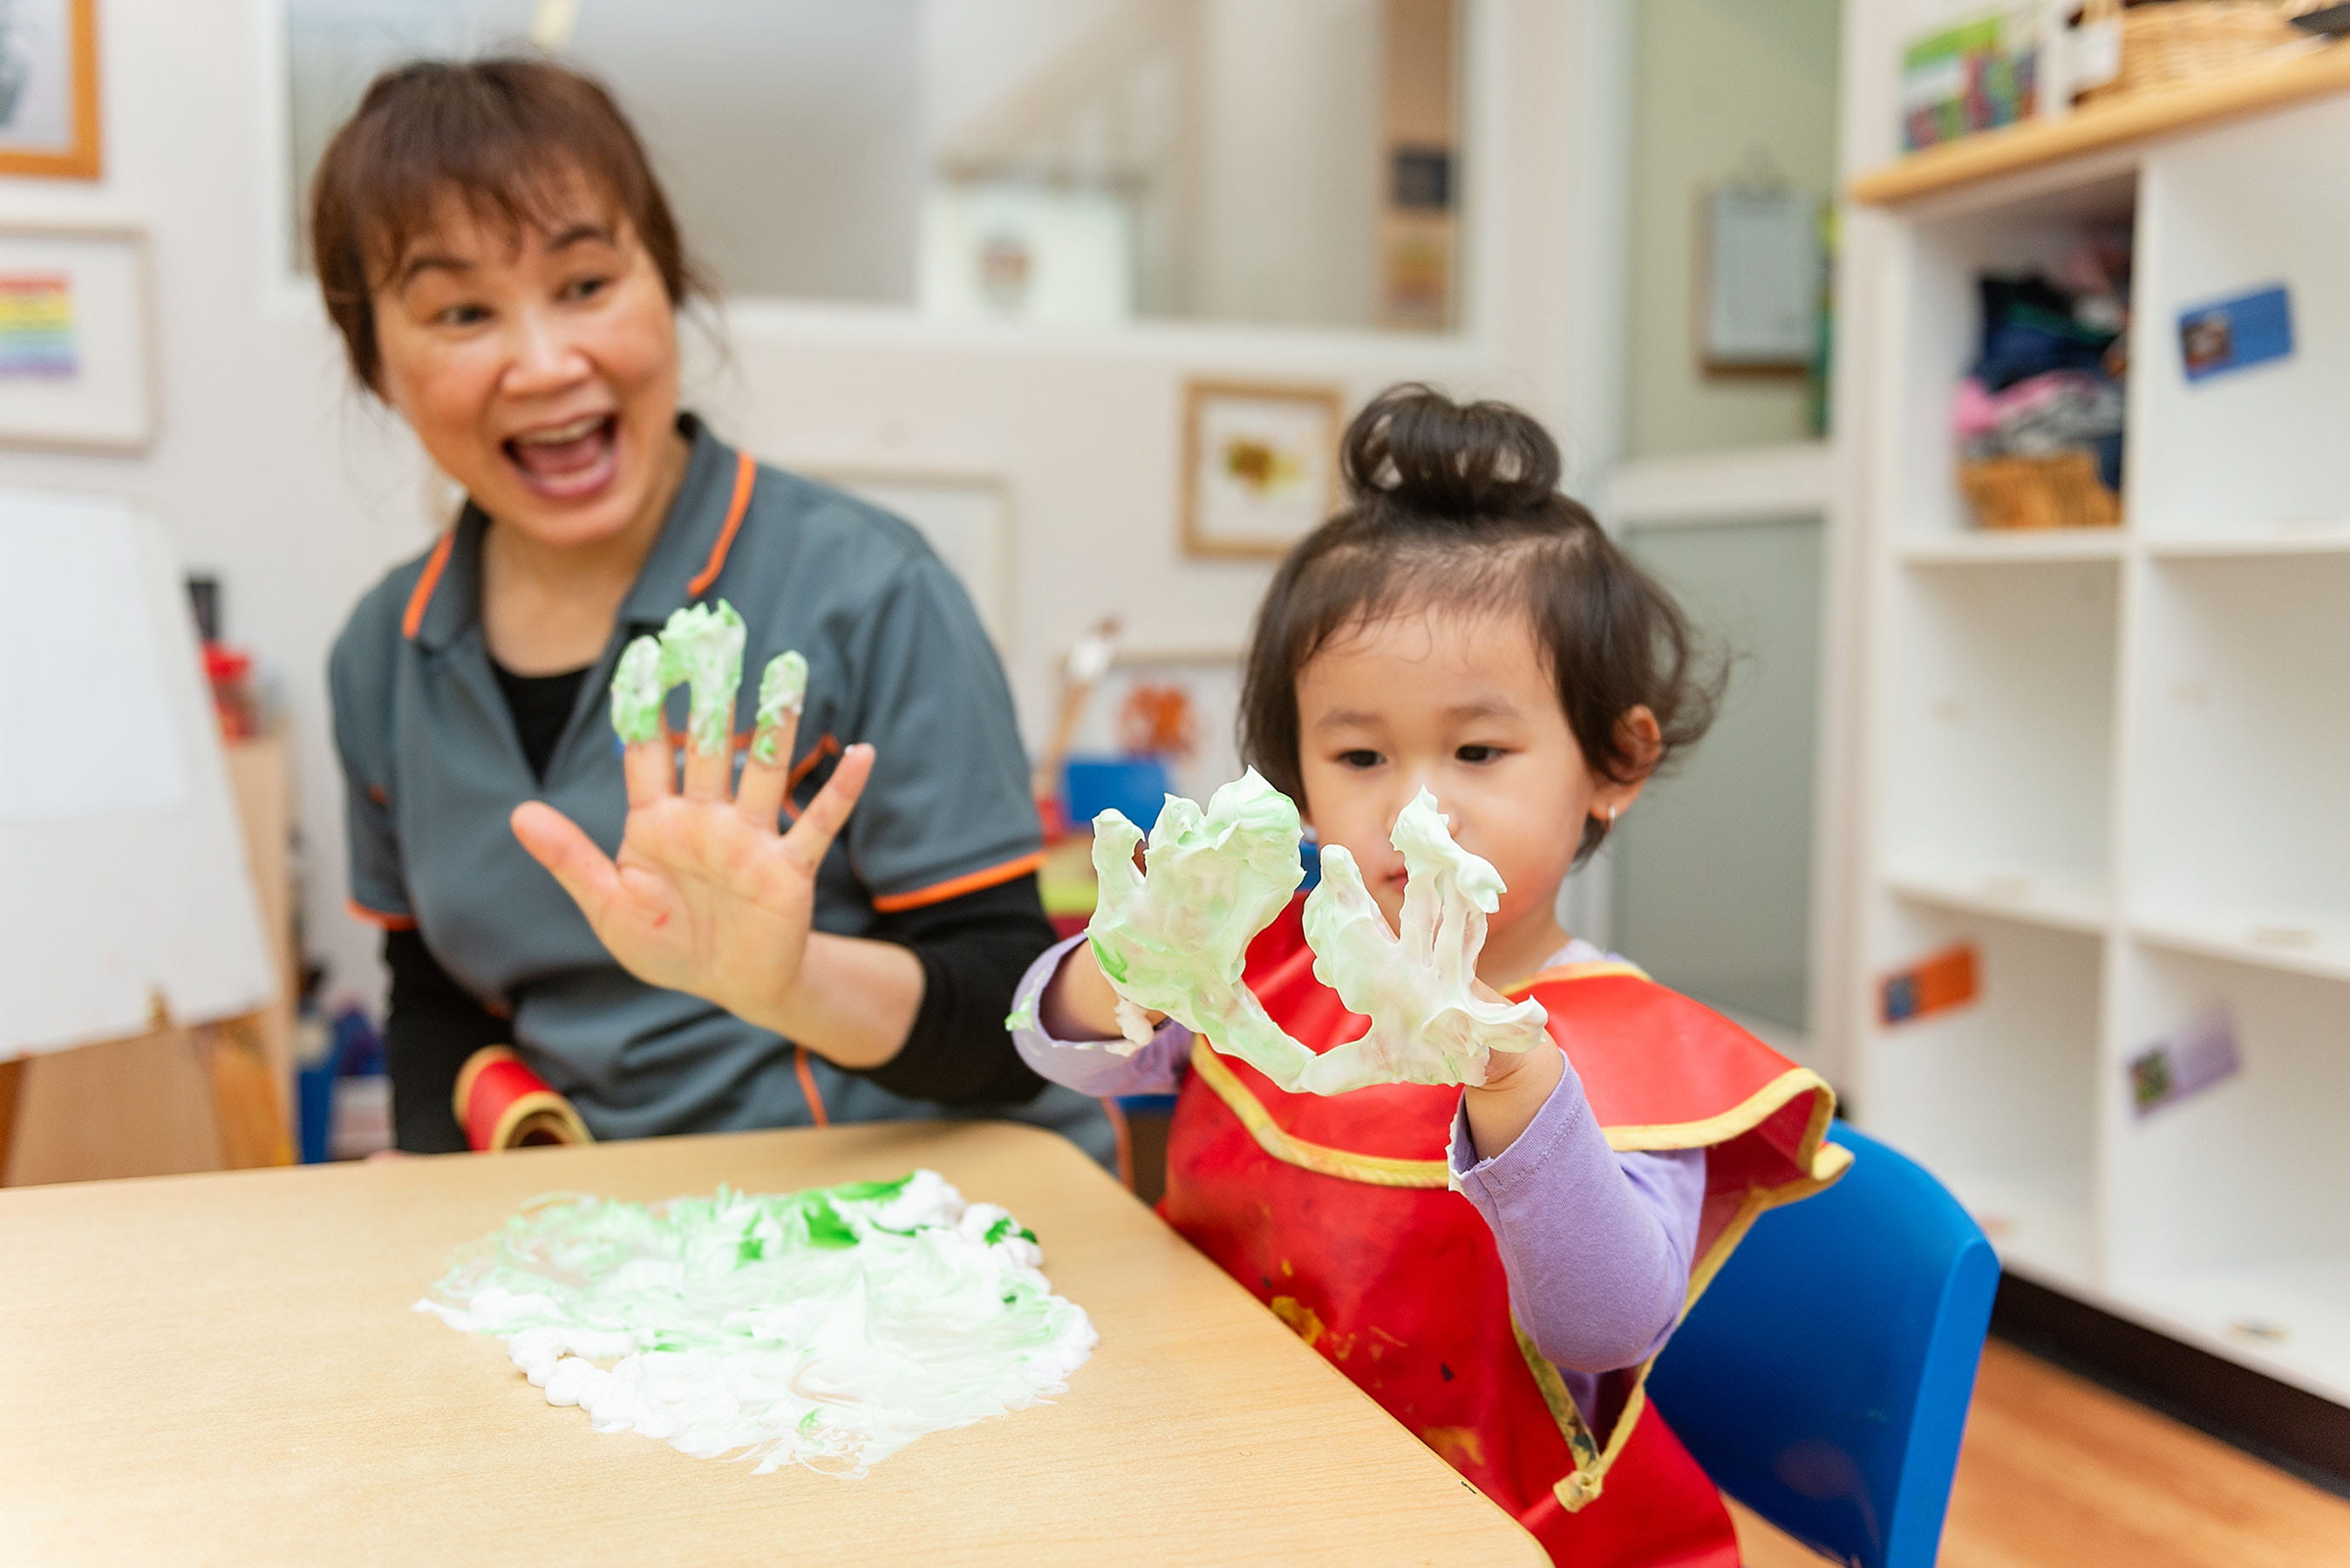 Educator and child having fun and making a mess at daycare